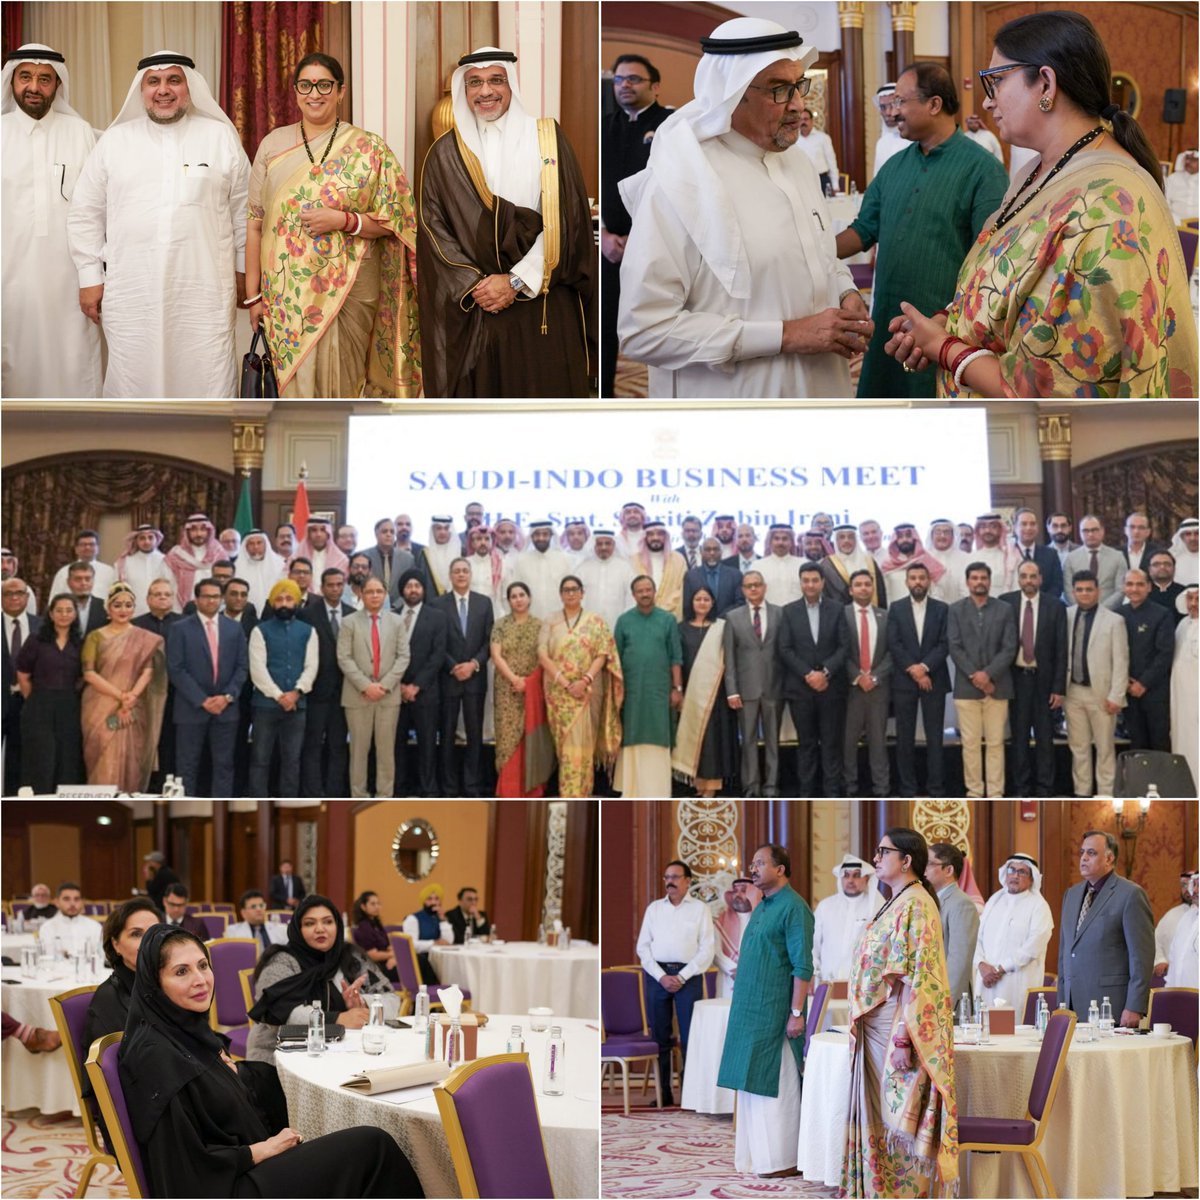 Engaged in a productive dialogue with distinguished Saudi and Indian business professionals, underscoring the significance of economic ties in our bilateral relations. India, the land of opportunities, is committed to building a robust partnership with our Saudi counterparts…